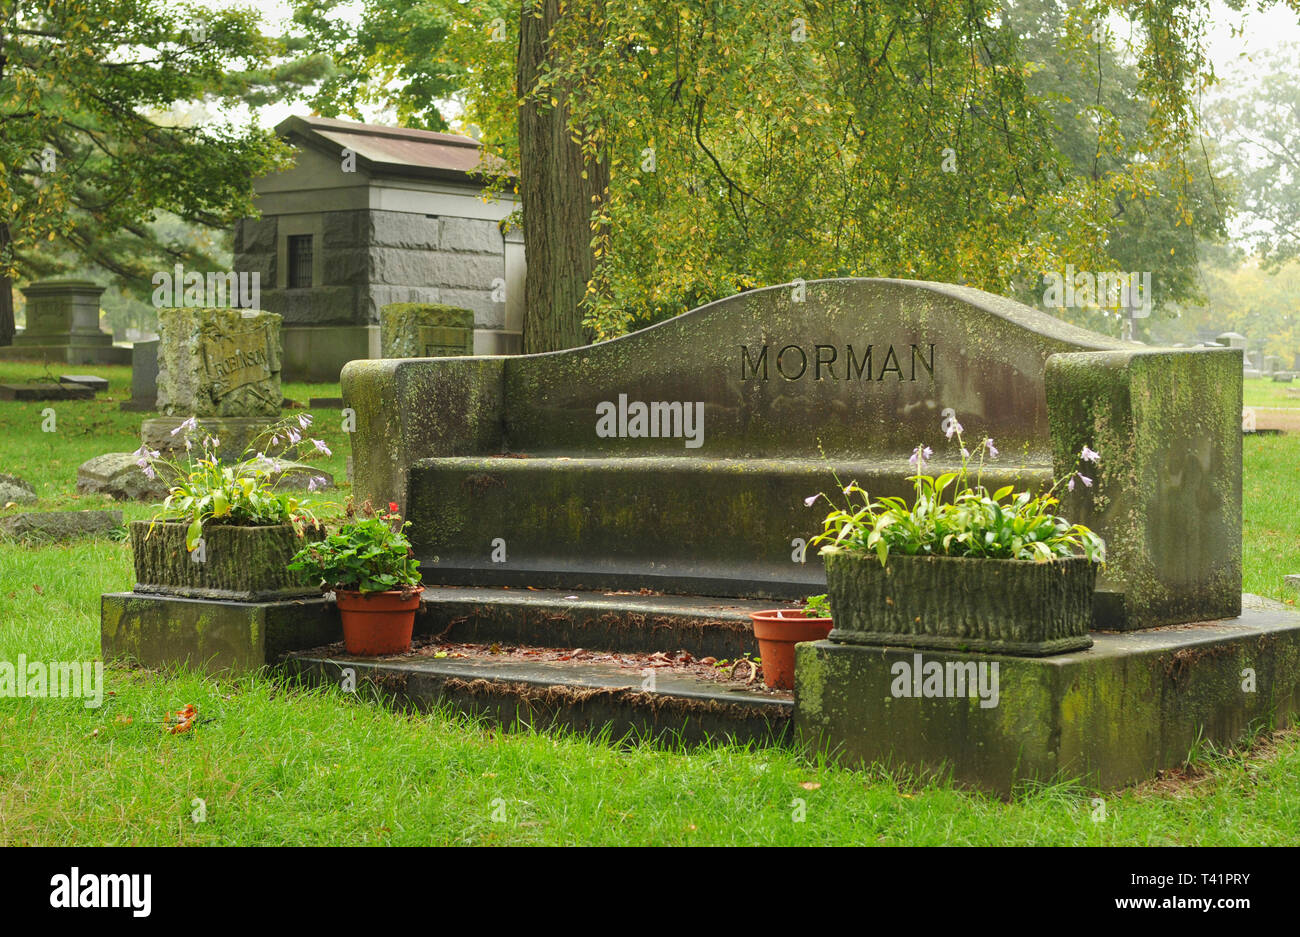 A unique bench-type monument marks the Morman grave at the historic Oakhill Cemetery in Grand Rapids, Michigan. Stock Photo